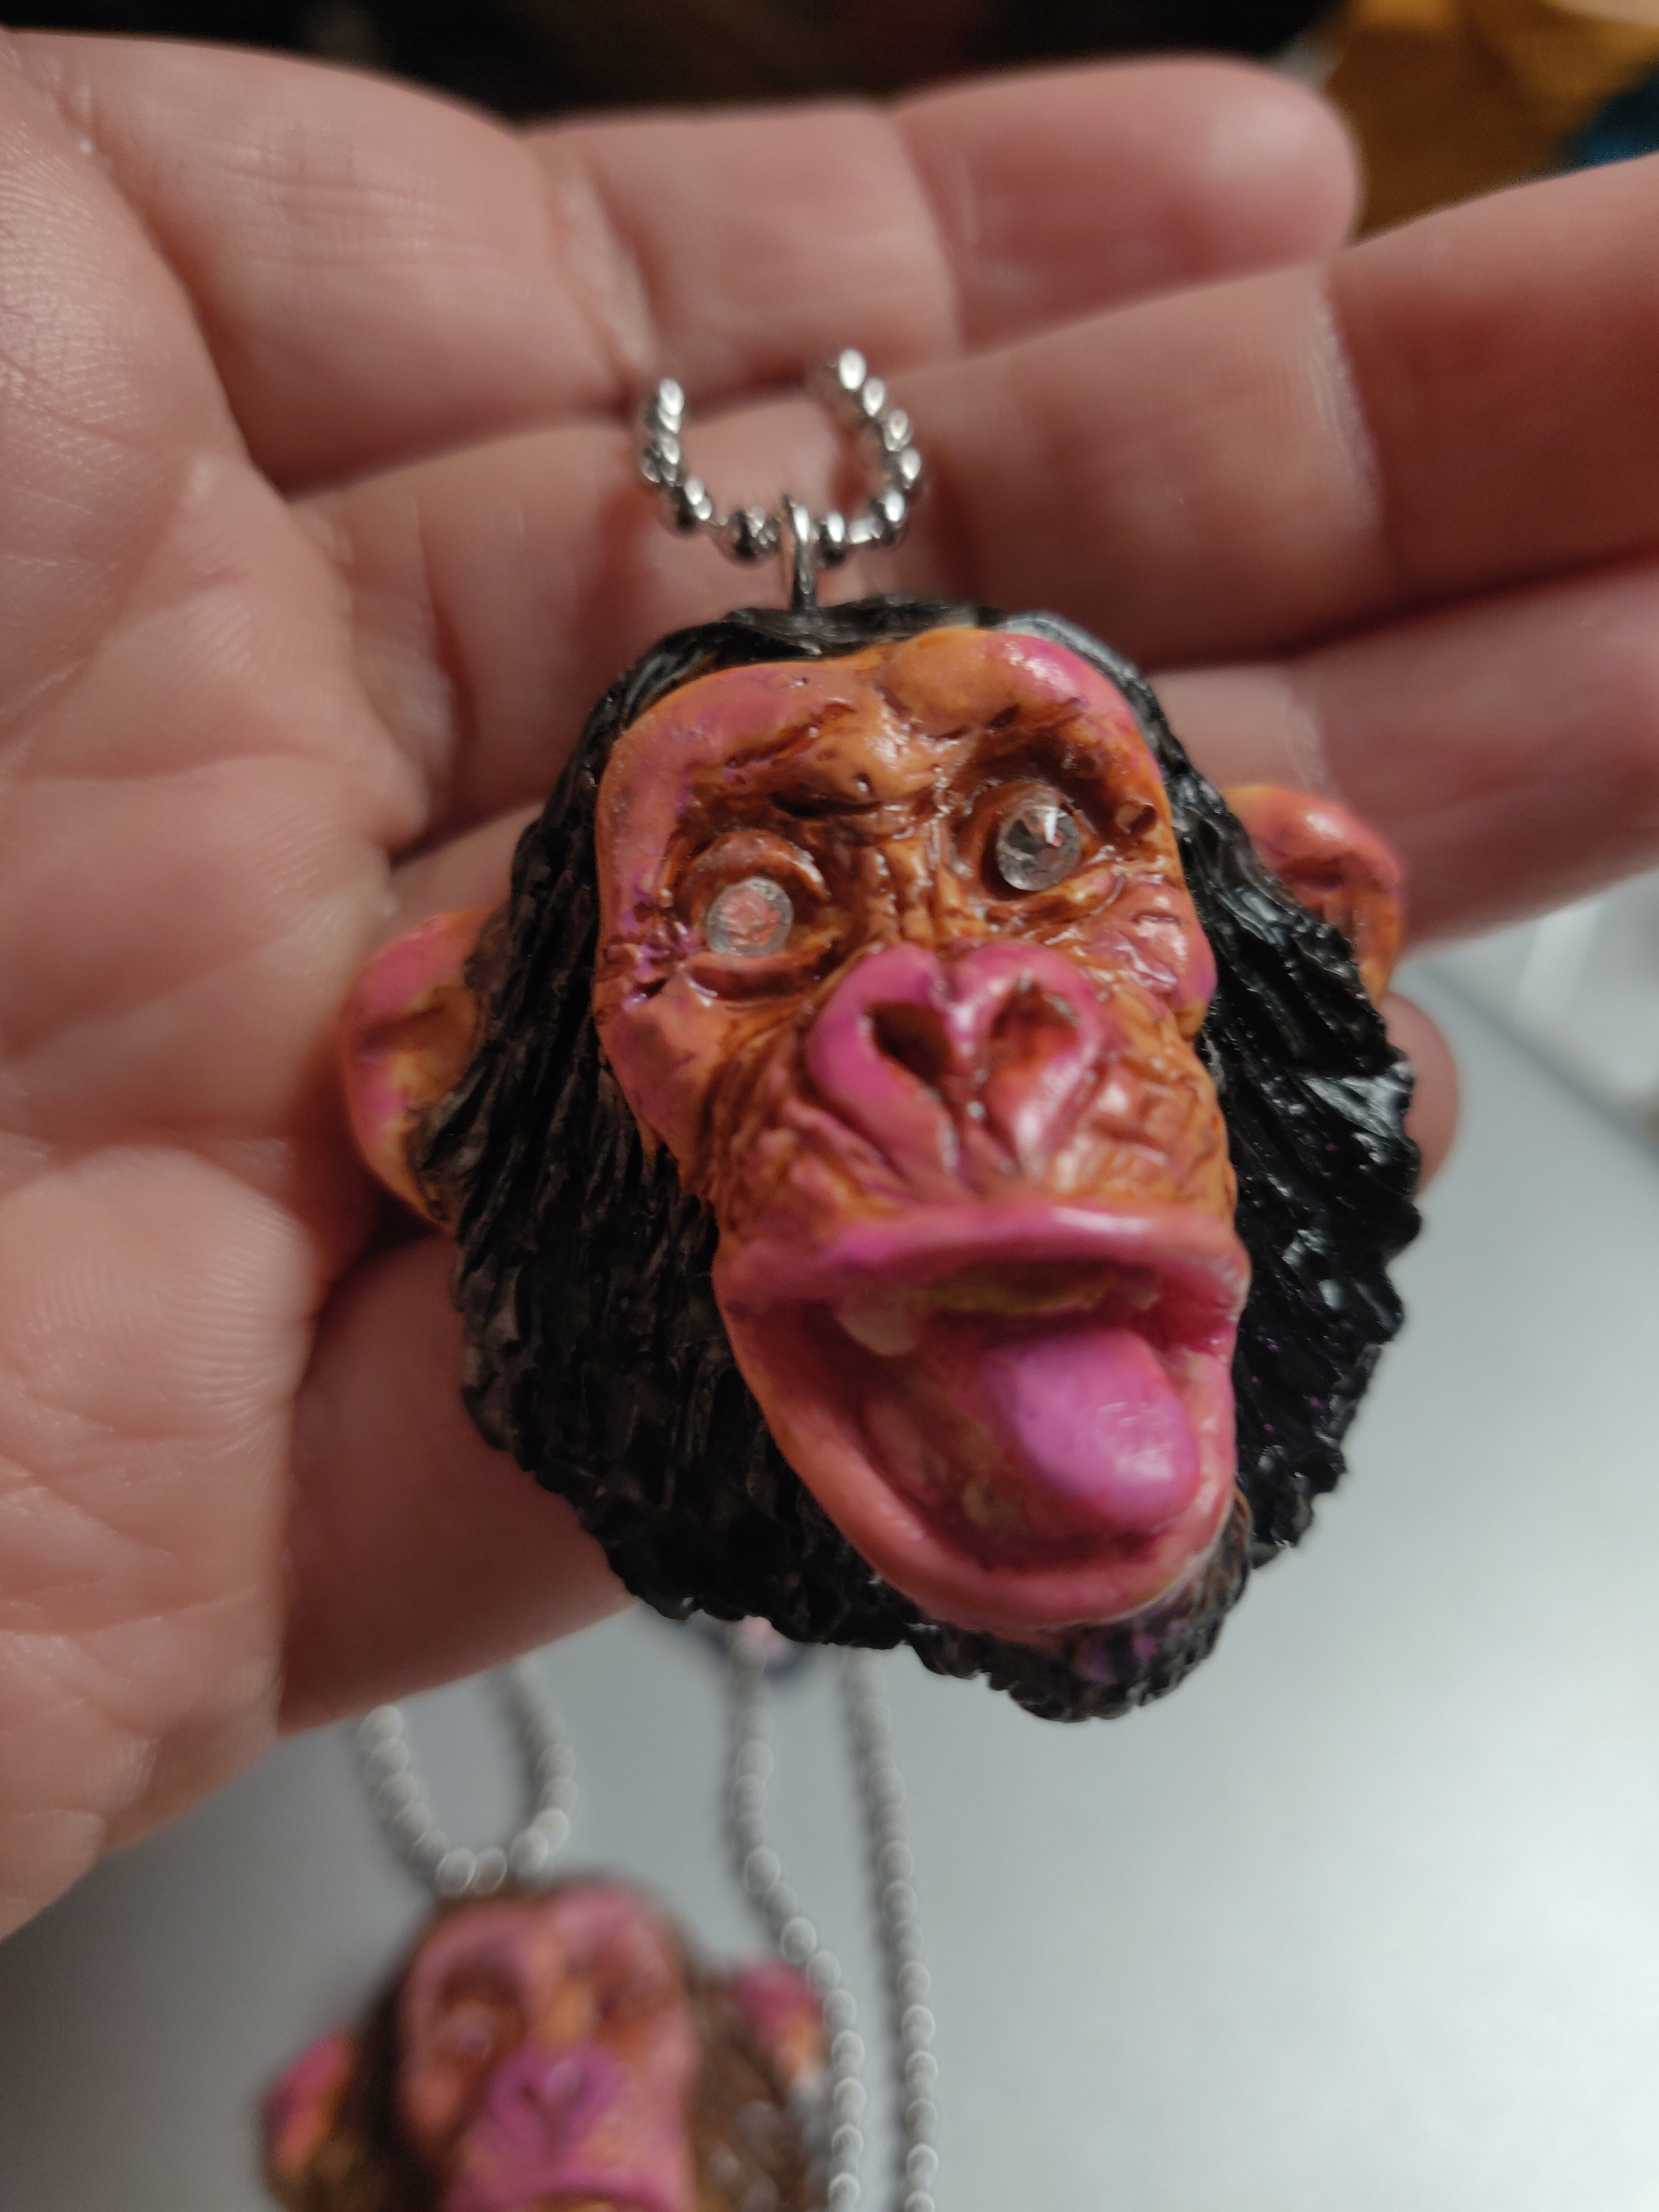 Monkey Hand-sculpted Necklaces